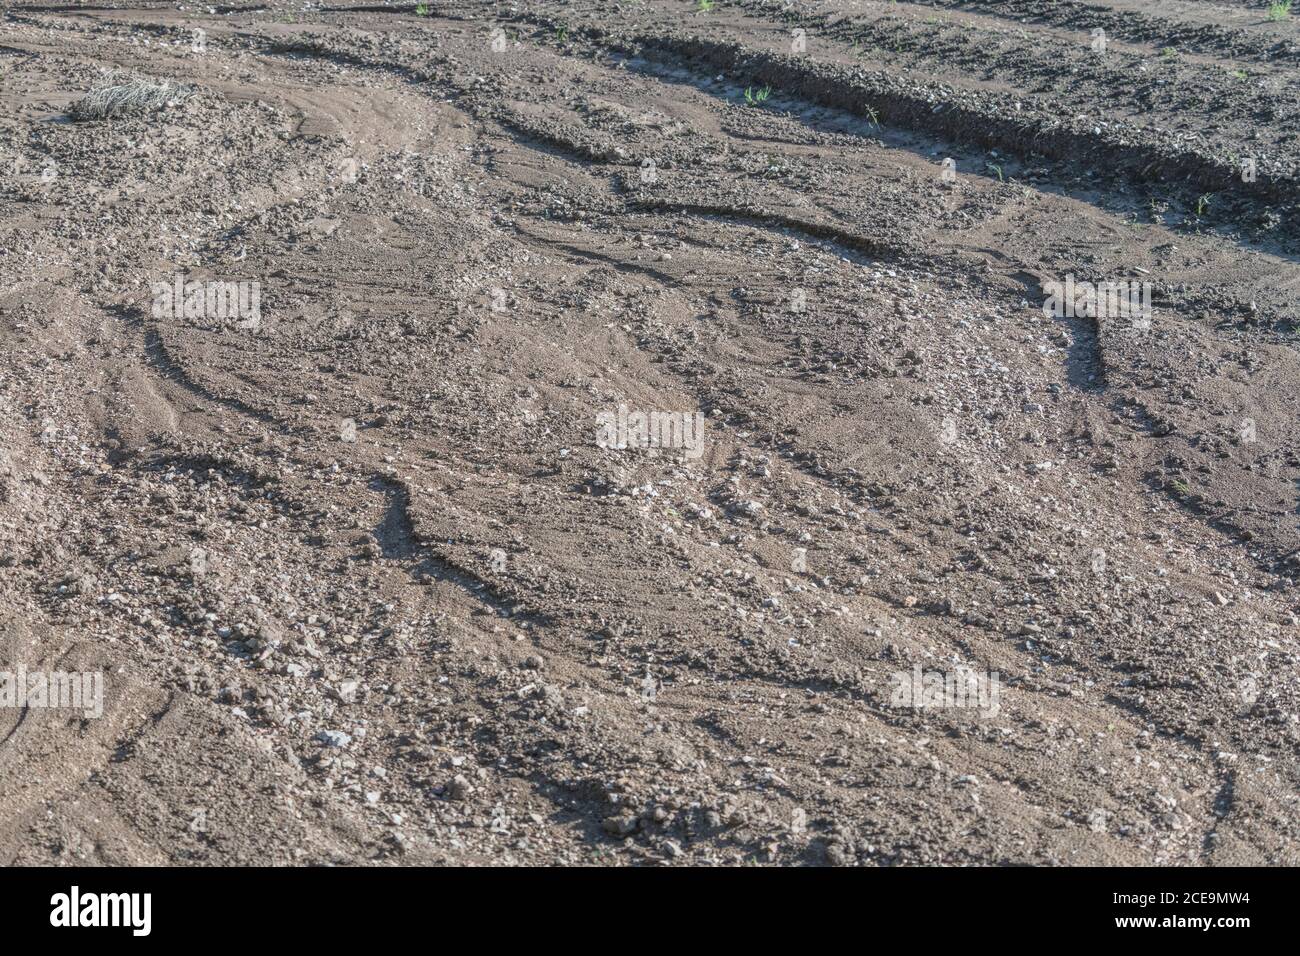 Serious rainwater erosion in a potato field where water has washed away lower-most rows of potatoes. Effects of heavy rain. See additional notes. Stock Photo